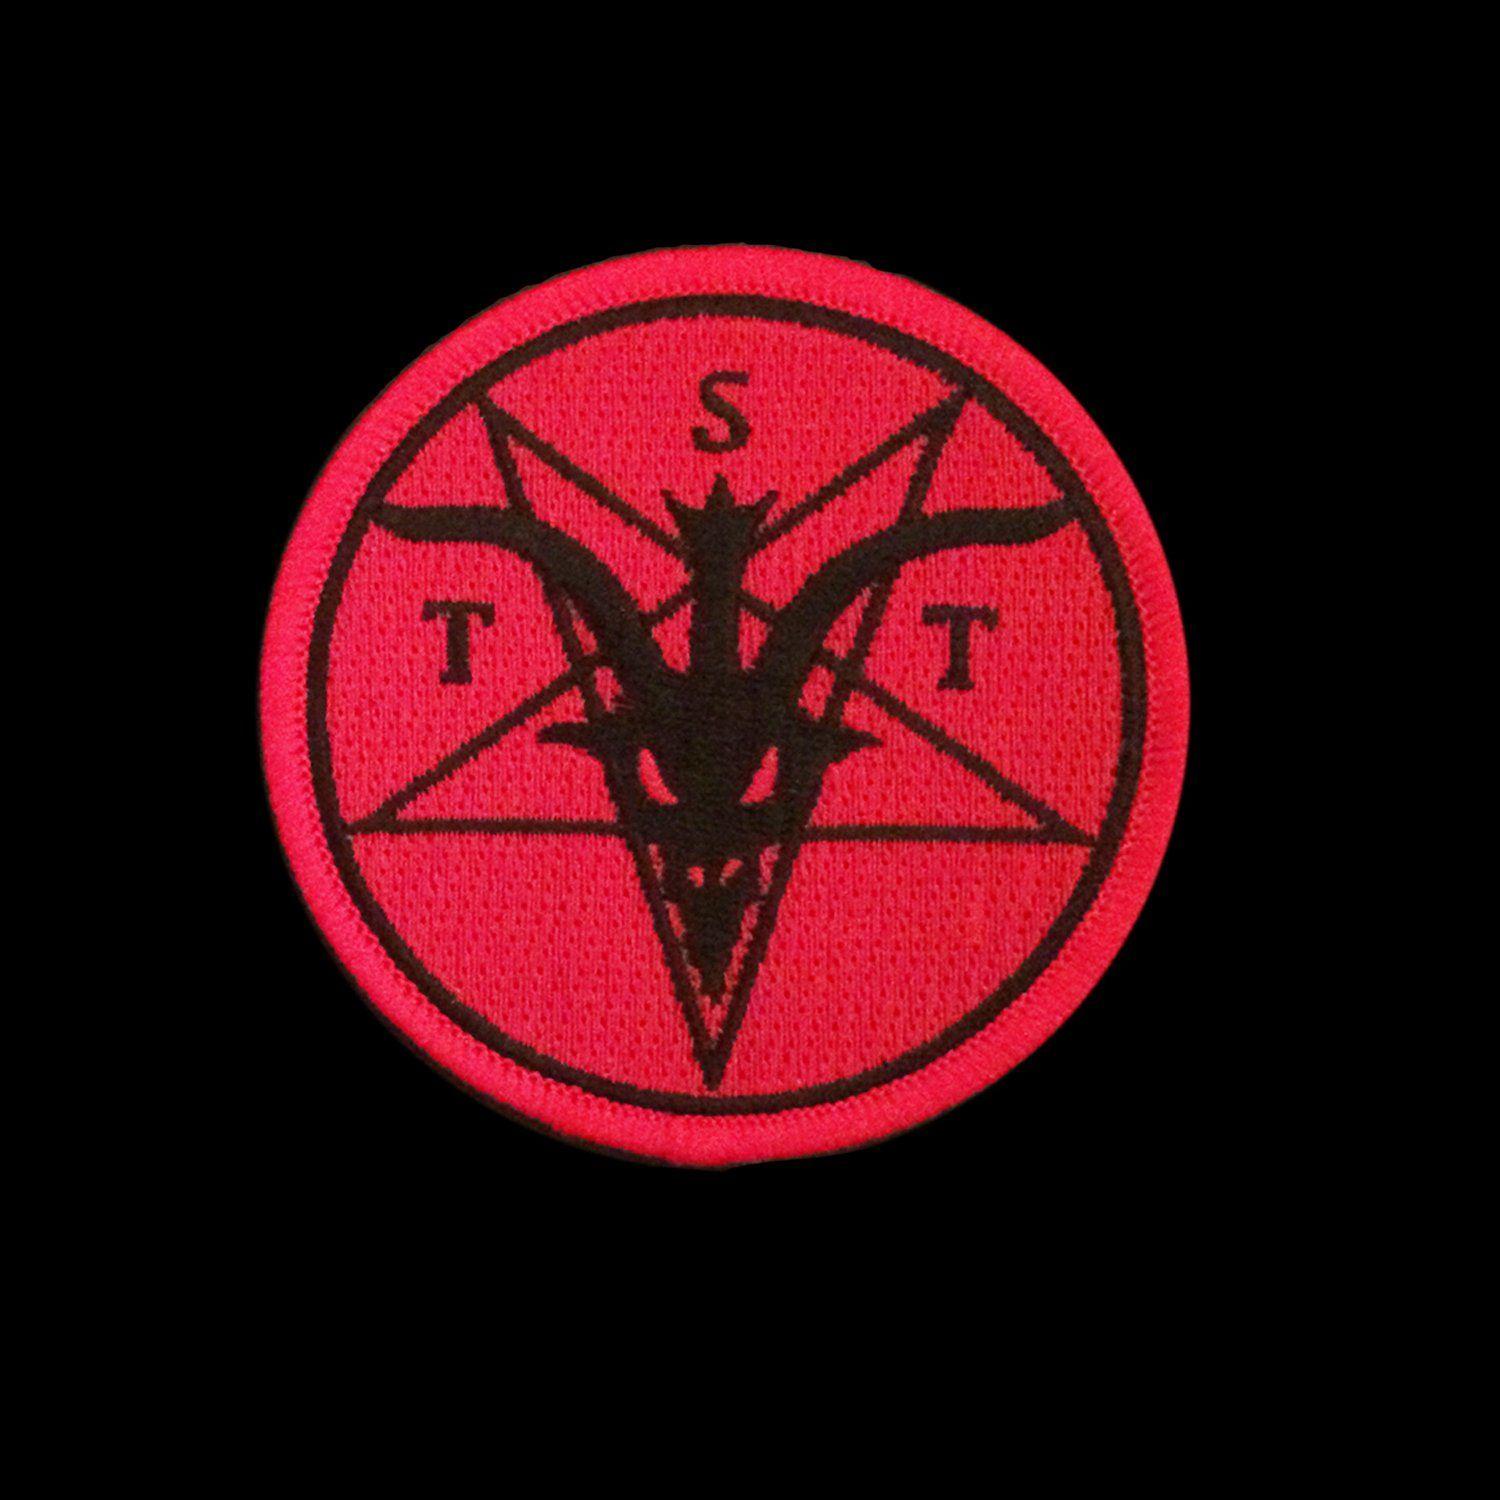 Black White Red Circle Logo - TST Logo Patch in Black or Red New Designs - The Satanic Temple